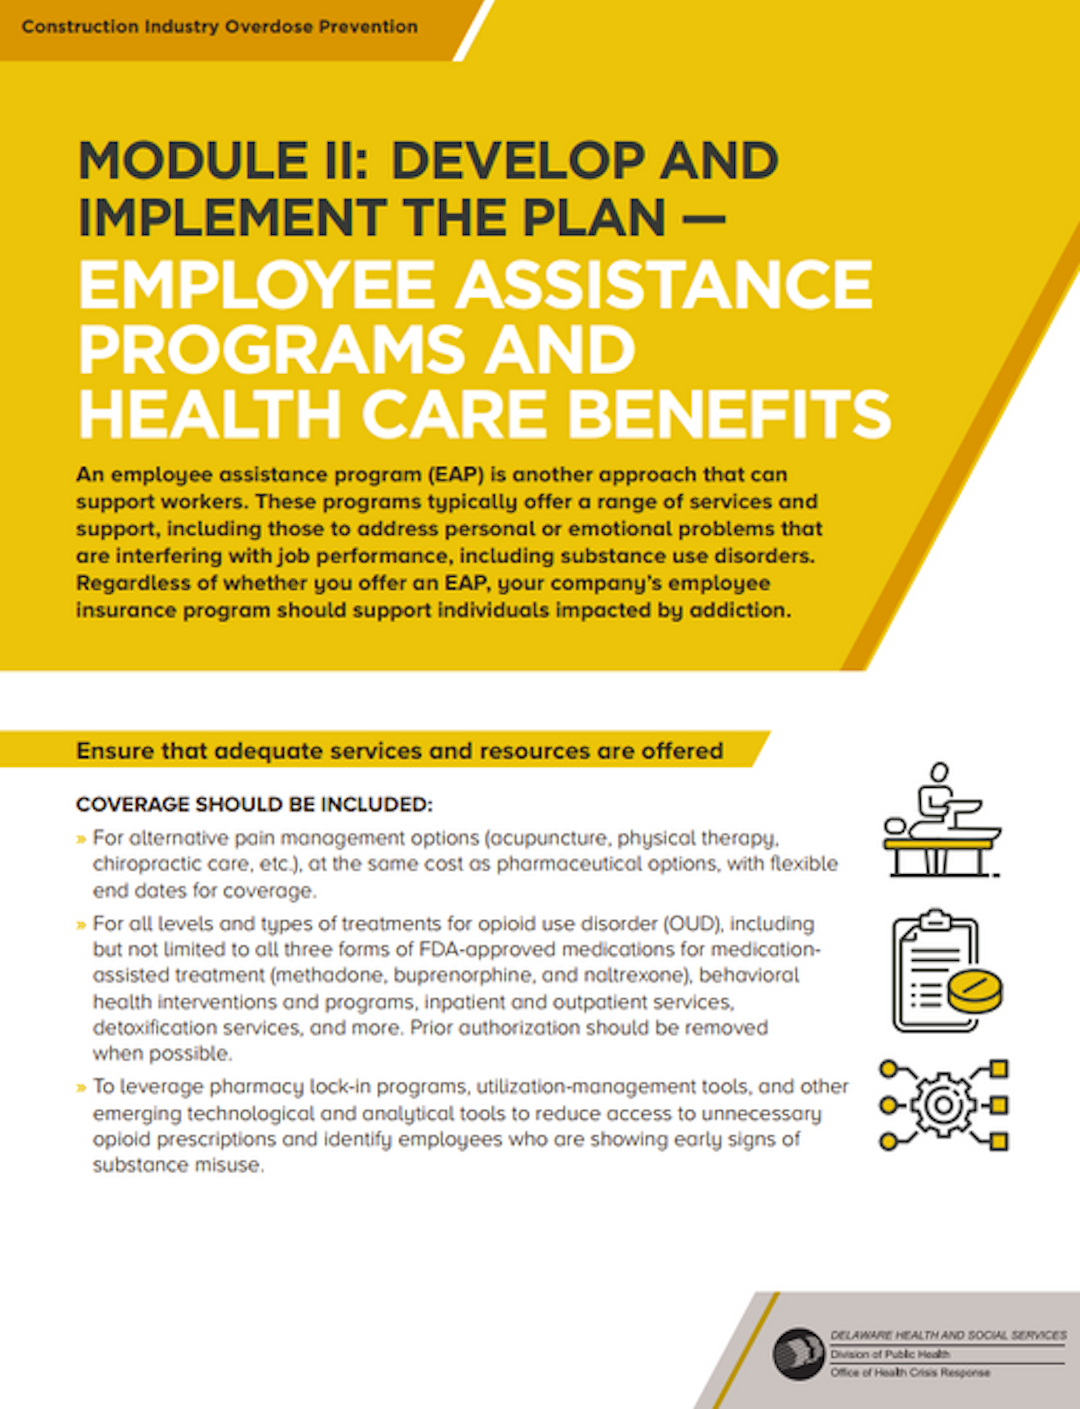 Module II: Develop and Implement the Plan — Employee Assistance Programs and Health Care Benefits